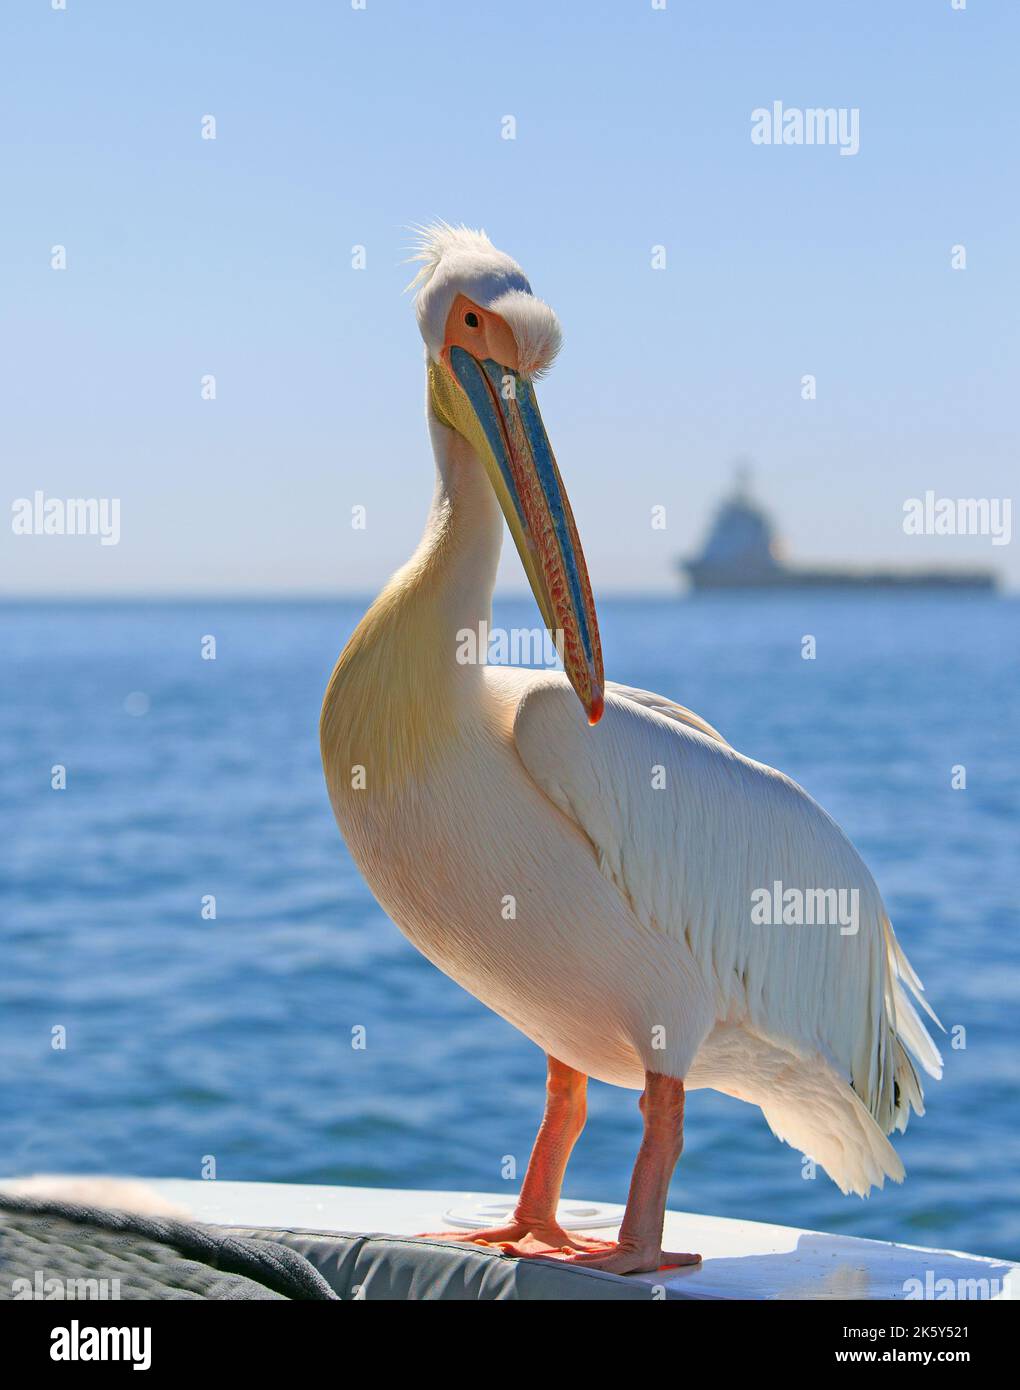 Portrait view of a full bodied Pelican standing on the edge of a boat with a seascape background, Walvis BAY, namibia, Stock Photo